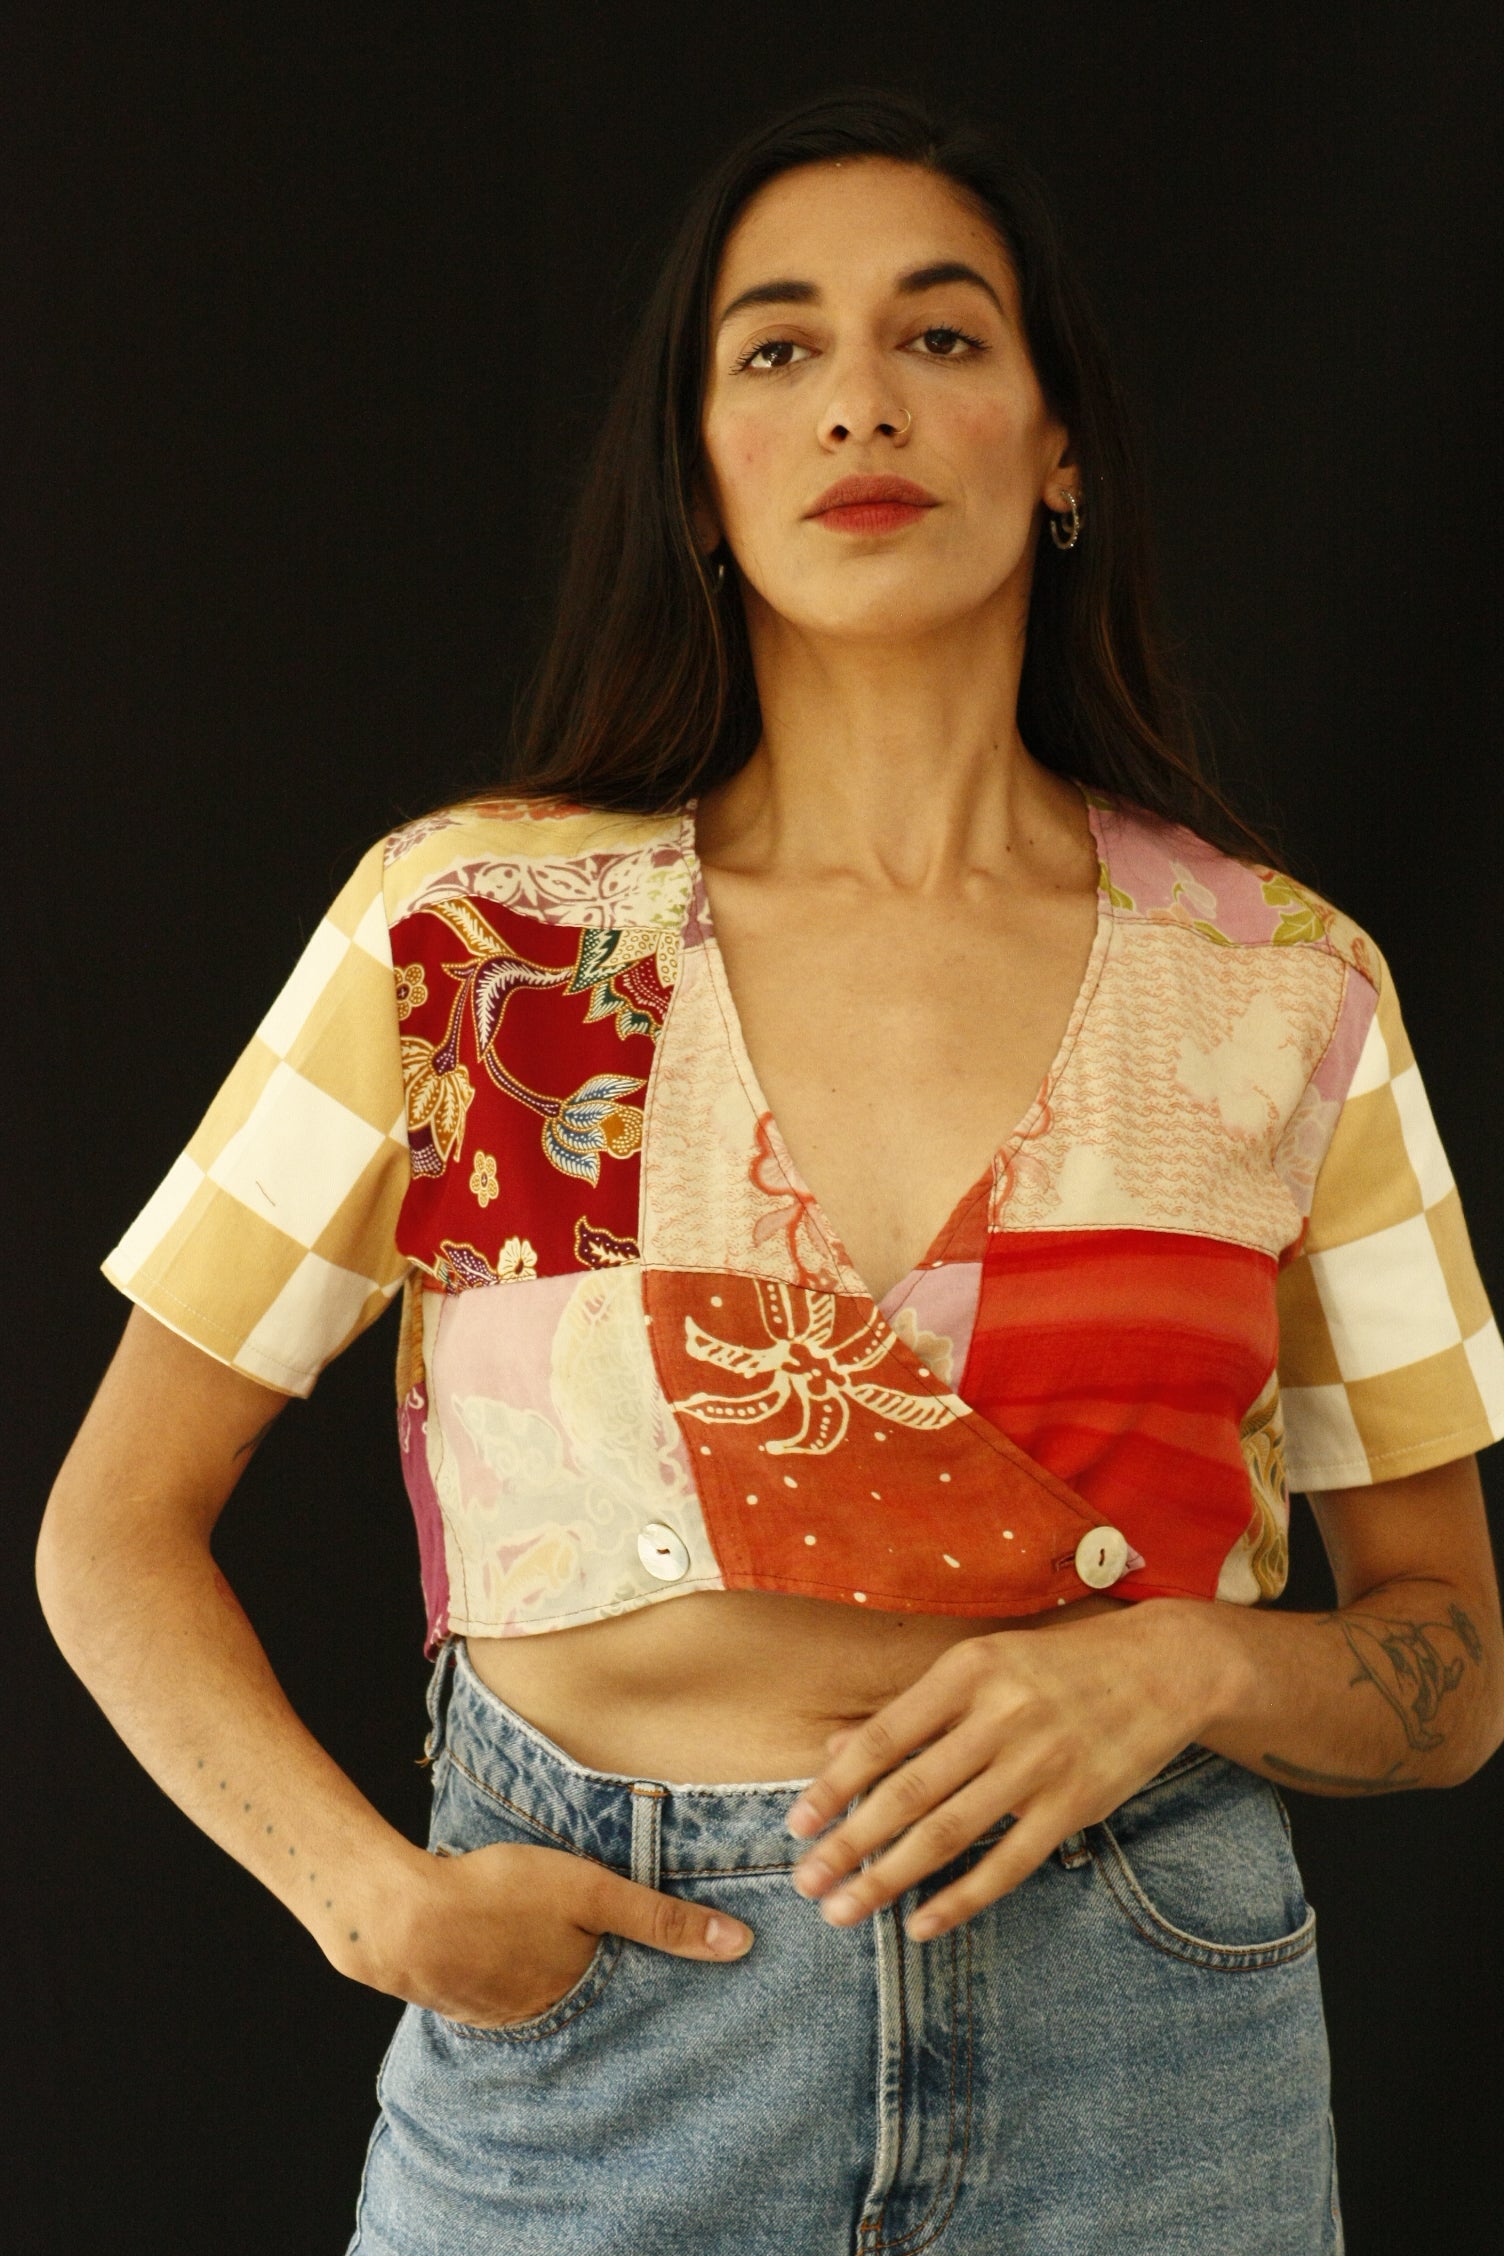 The fabric of this garment was found in Nishiki Market, Kyoto. The design was inspired by the street style, art and architecture of Japan. Deadstock pieces of fabric from India, Africa and Japan sewn together. Patchwork crop top with history, a statement garment for a lifetime. INGREDIENTS 100% cotton Mother of pearl buttons (concha de nacar) Ethically made in Ecuador. Sustainable fashion, handmade, natural fibers, vintage textiles and upcycled materials.